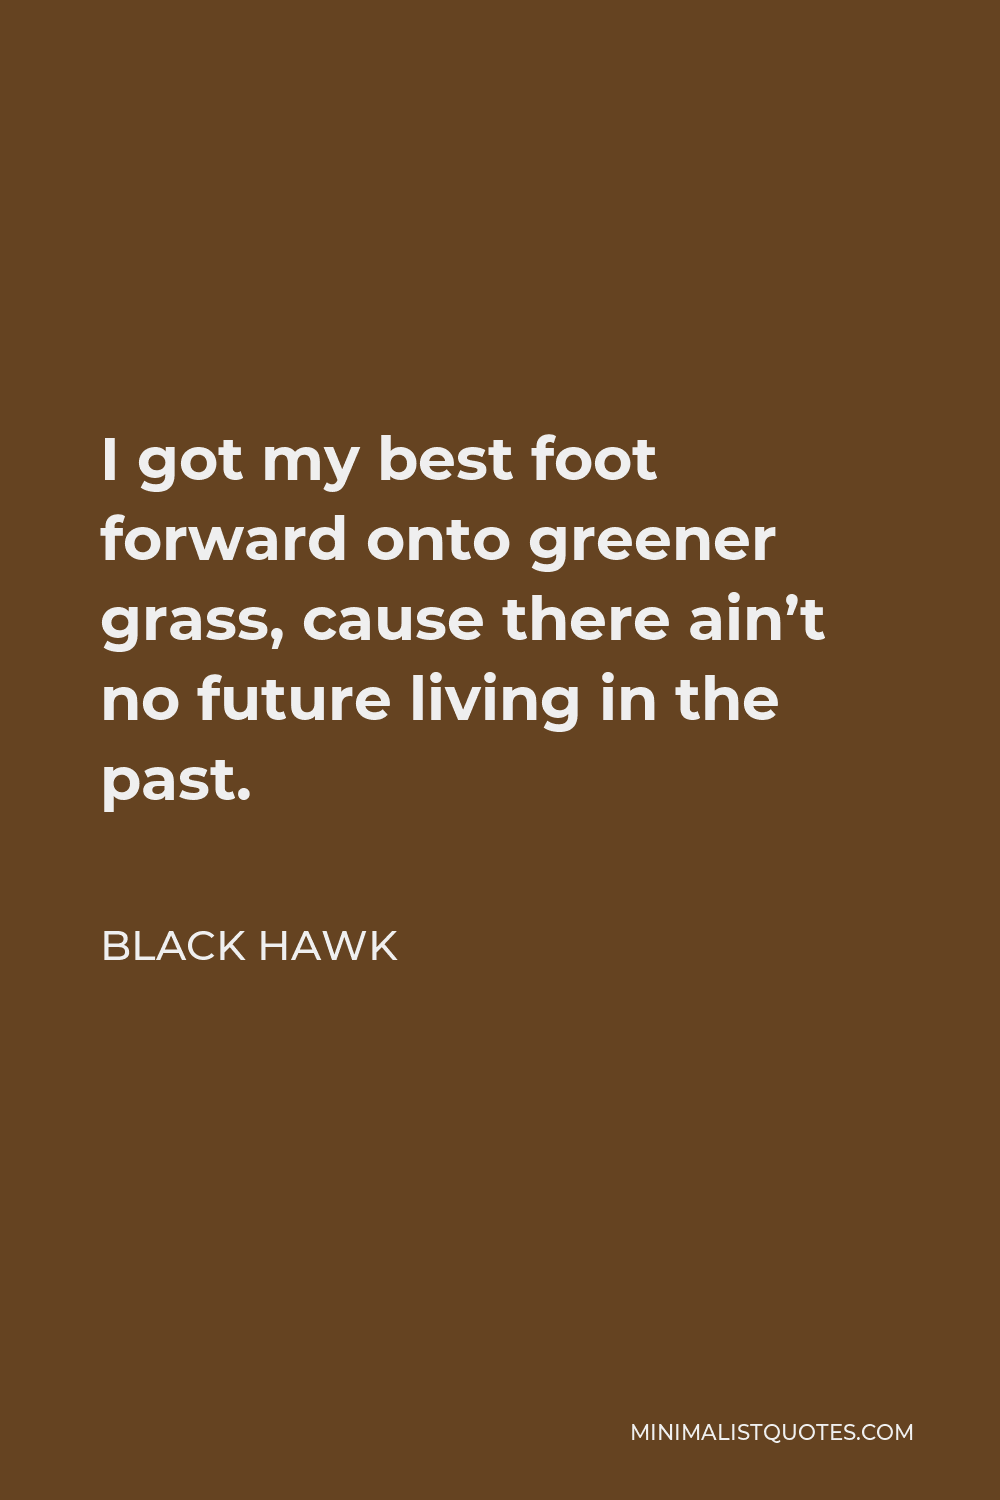 Black Hawk Quote - I got my best foot forward onto greener grass, cause there ain’t no future living in the past.